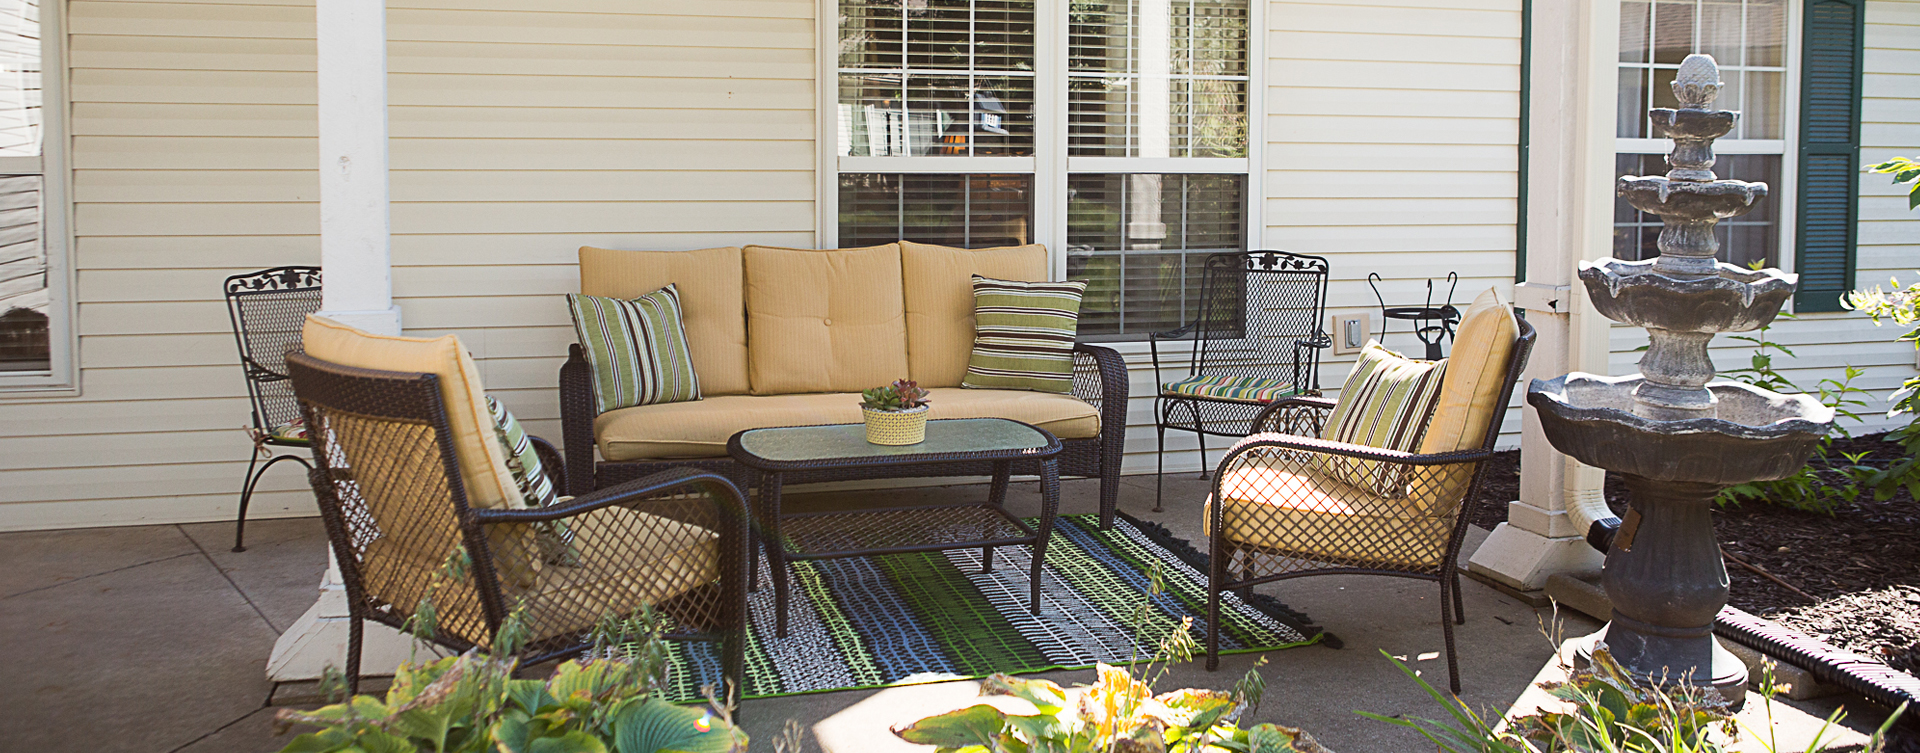 Relax in your favorite chair on the porch at Bickford of Muscatine